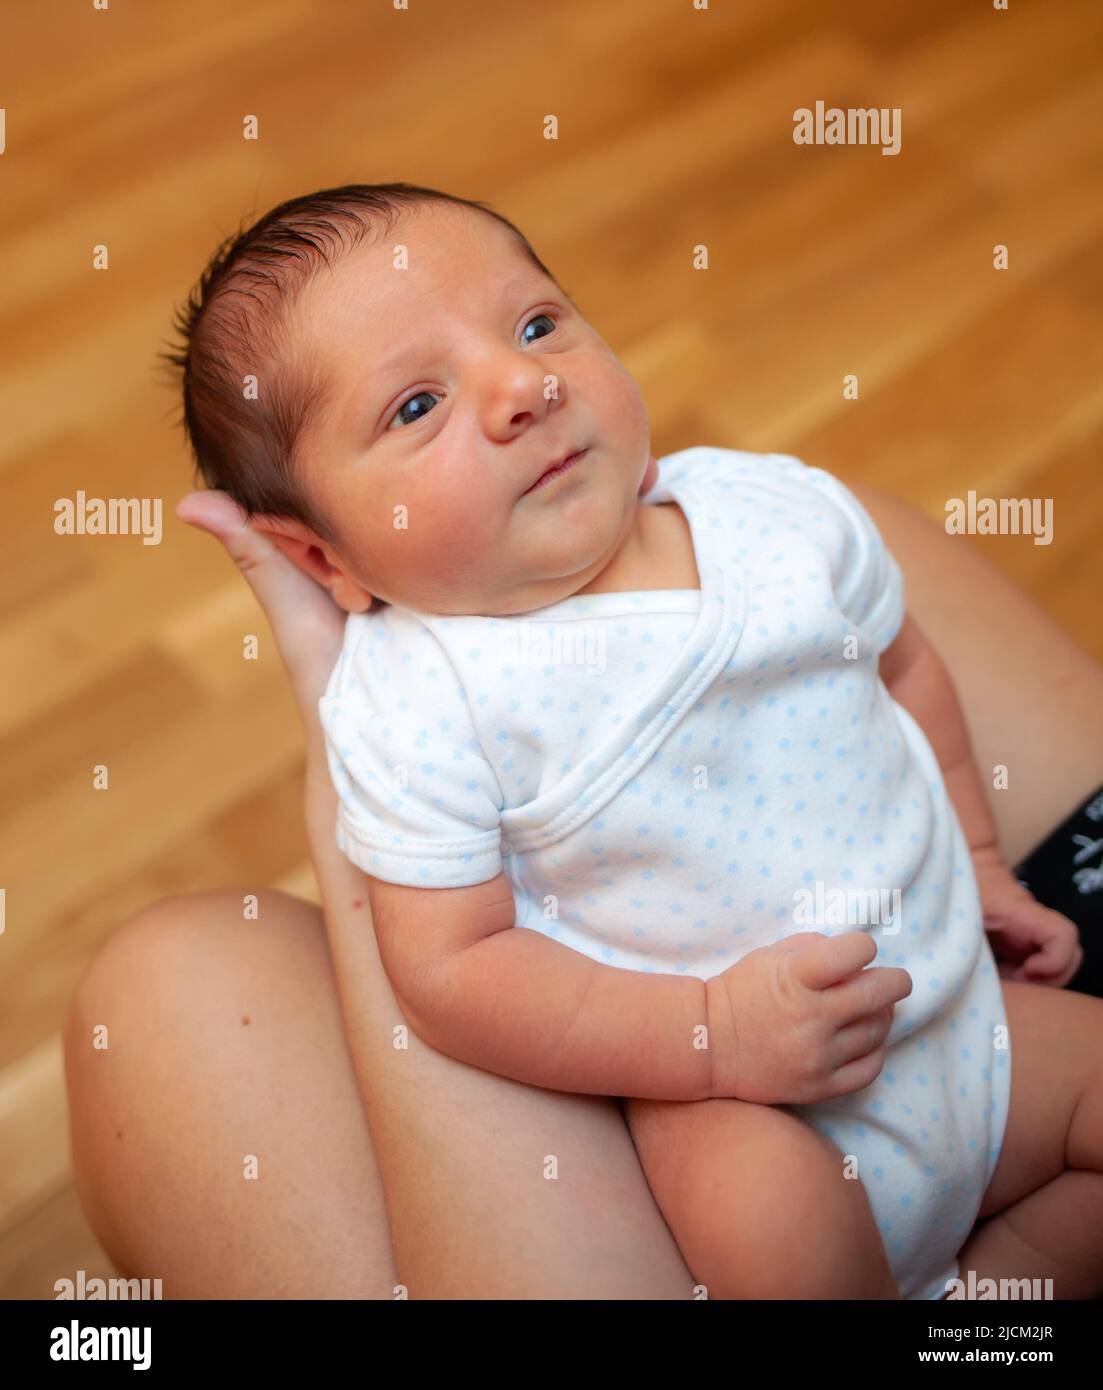 A few days old baby looks at his mother's face with a look of curiosity. Pediatric vision concept. Stock Photo